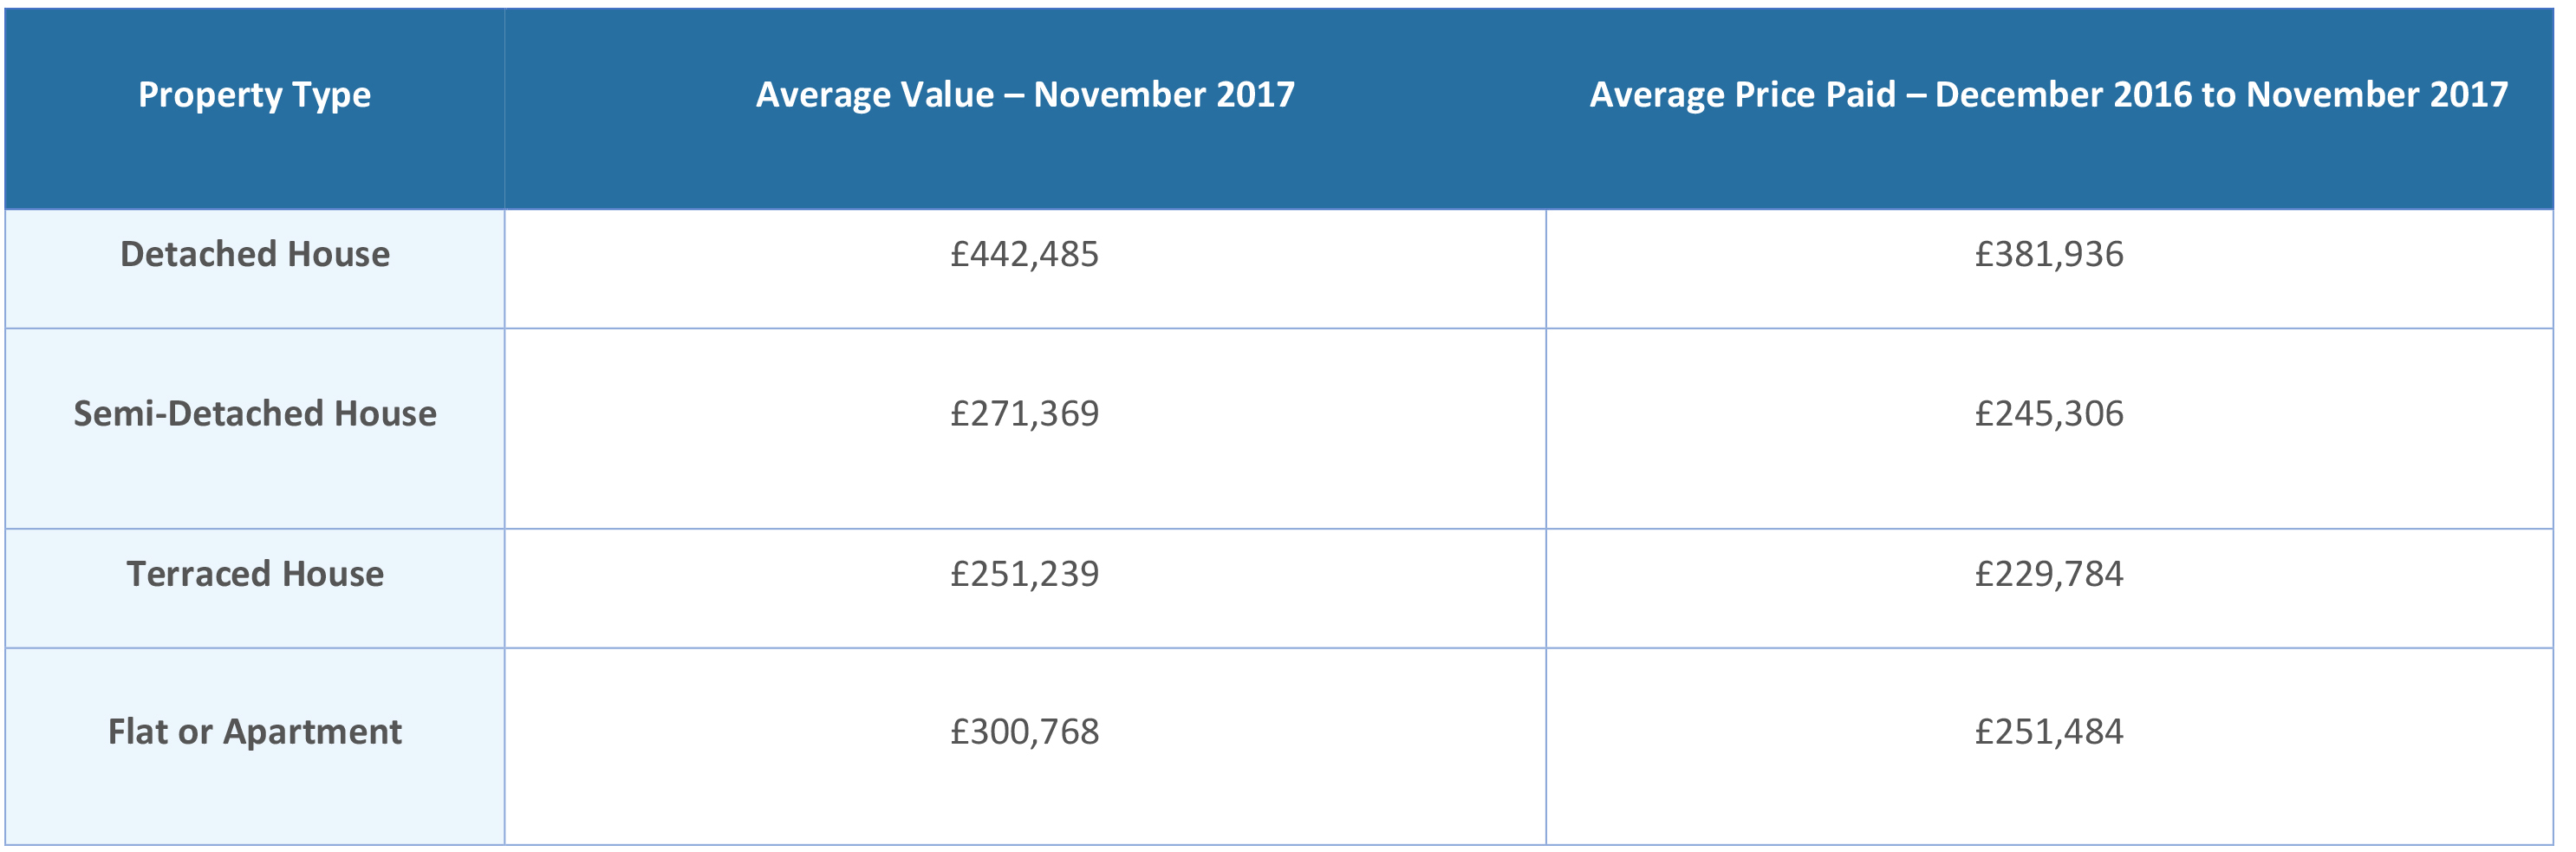 property price tables